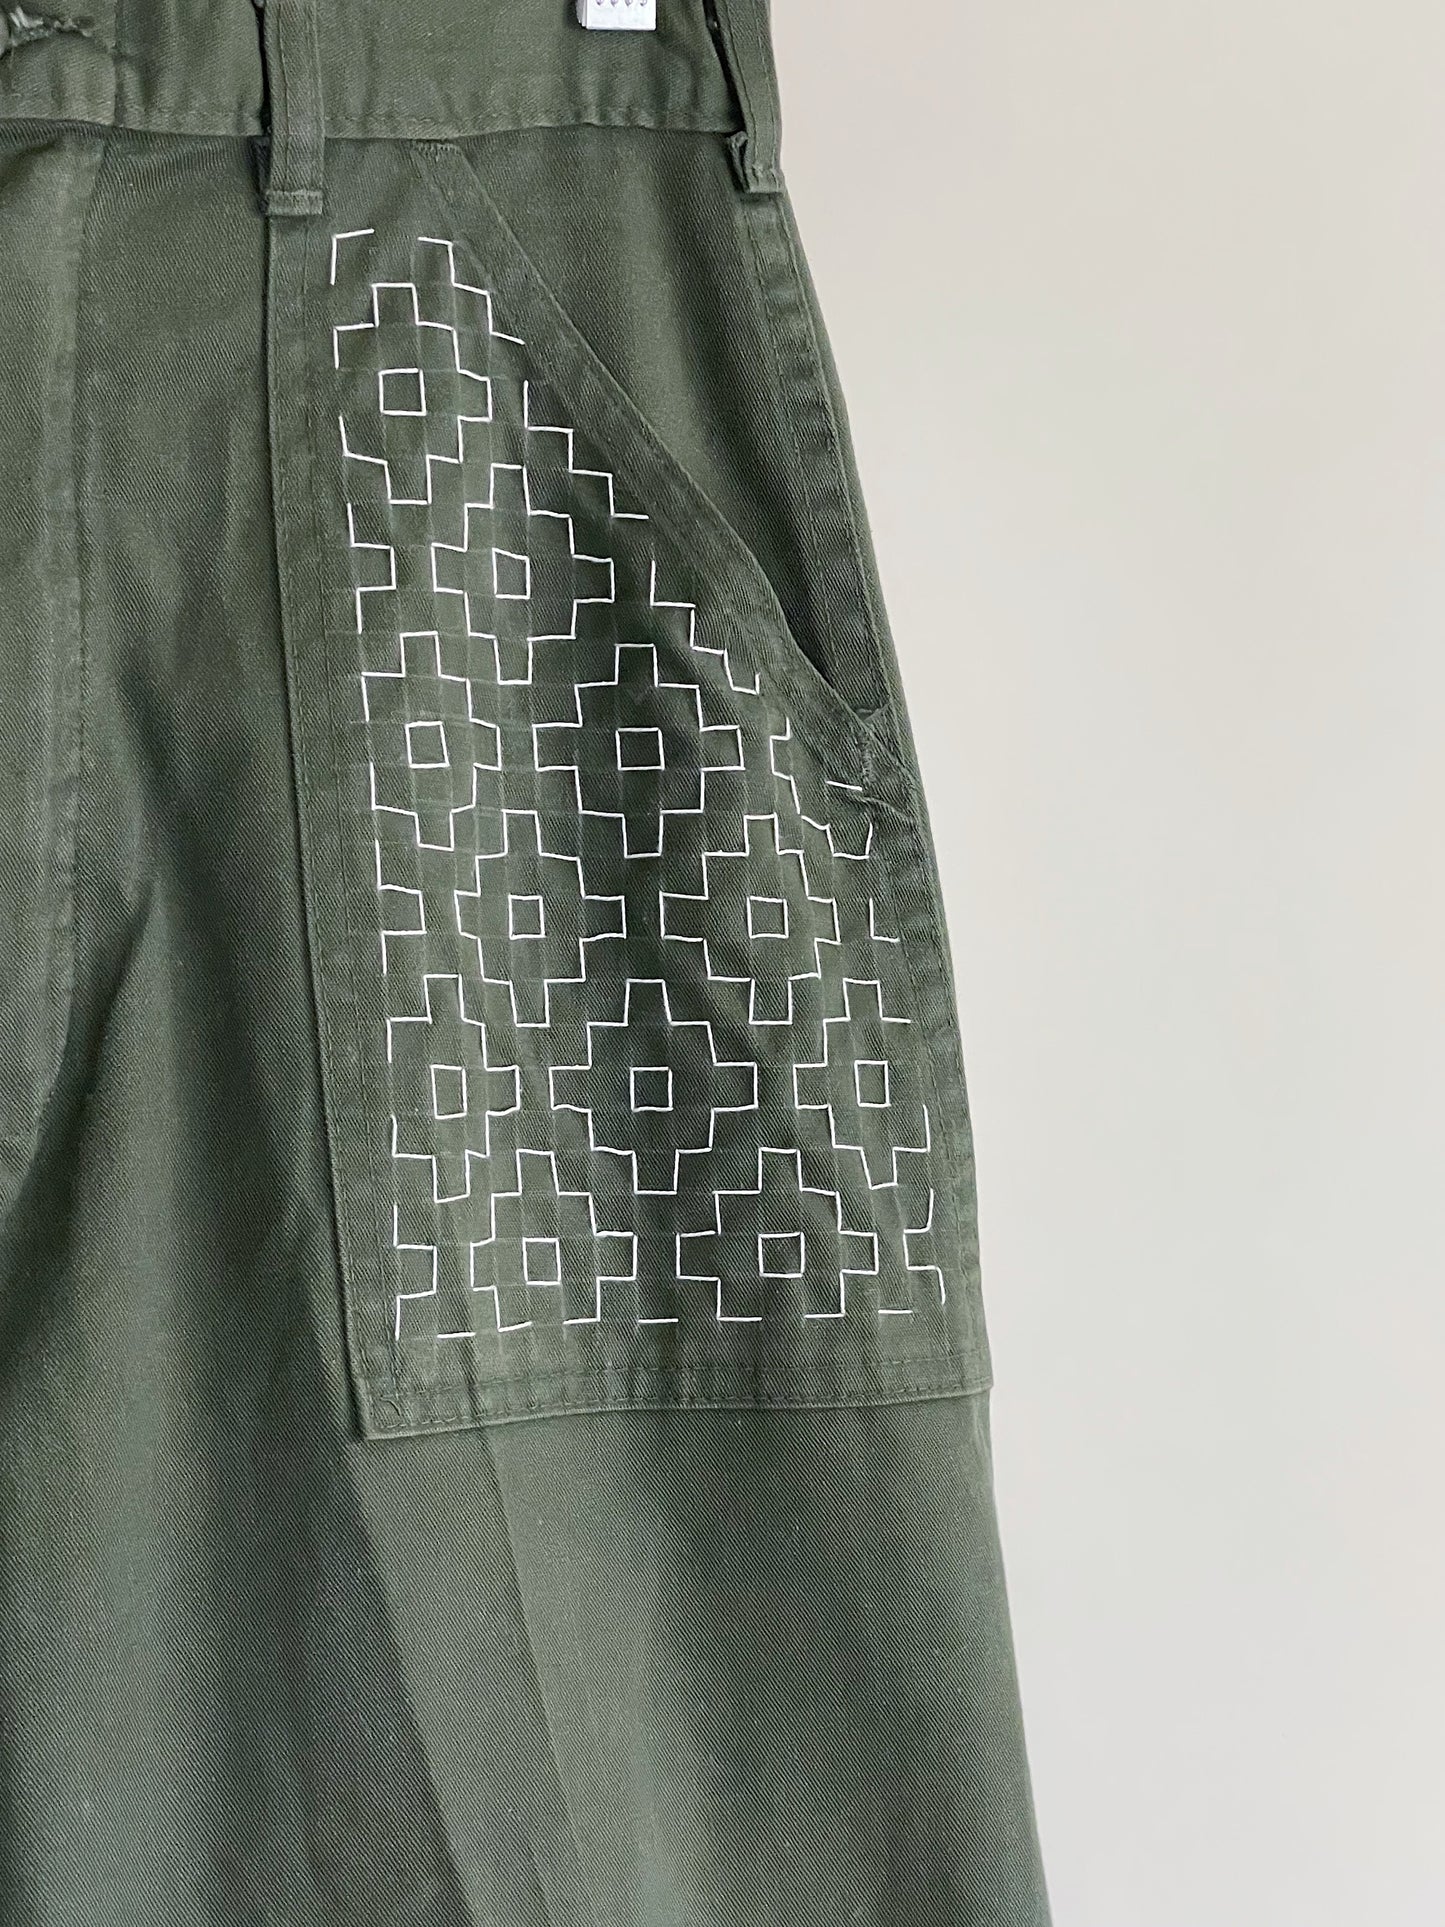 28" Waist 1960's Military Issued Olive Pants with Sashiko Embroidery - S/M